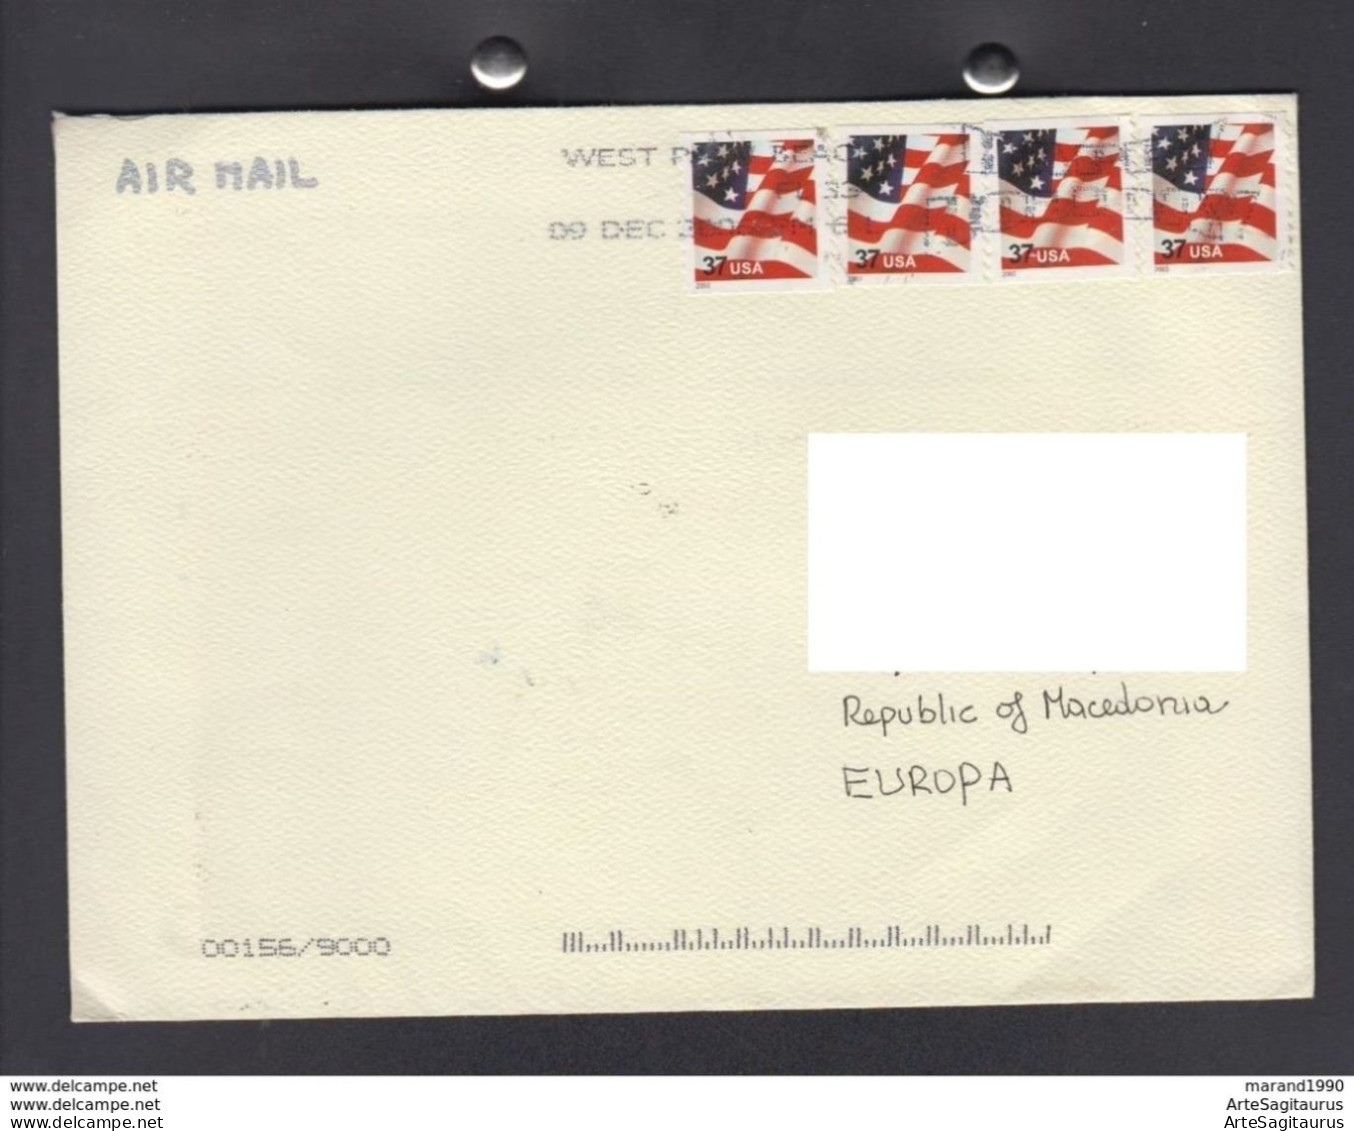 USA, COVER, AIR MAIL, FLAGS, REPUBLIC OF MACEDONIA  (008) - Briefe